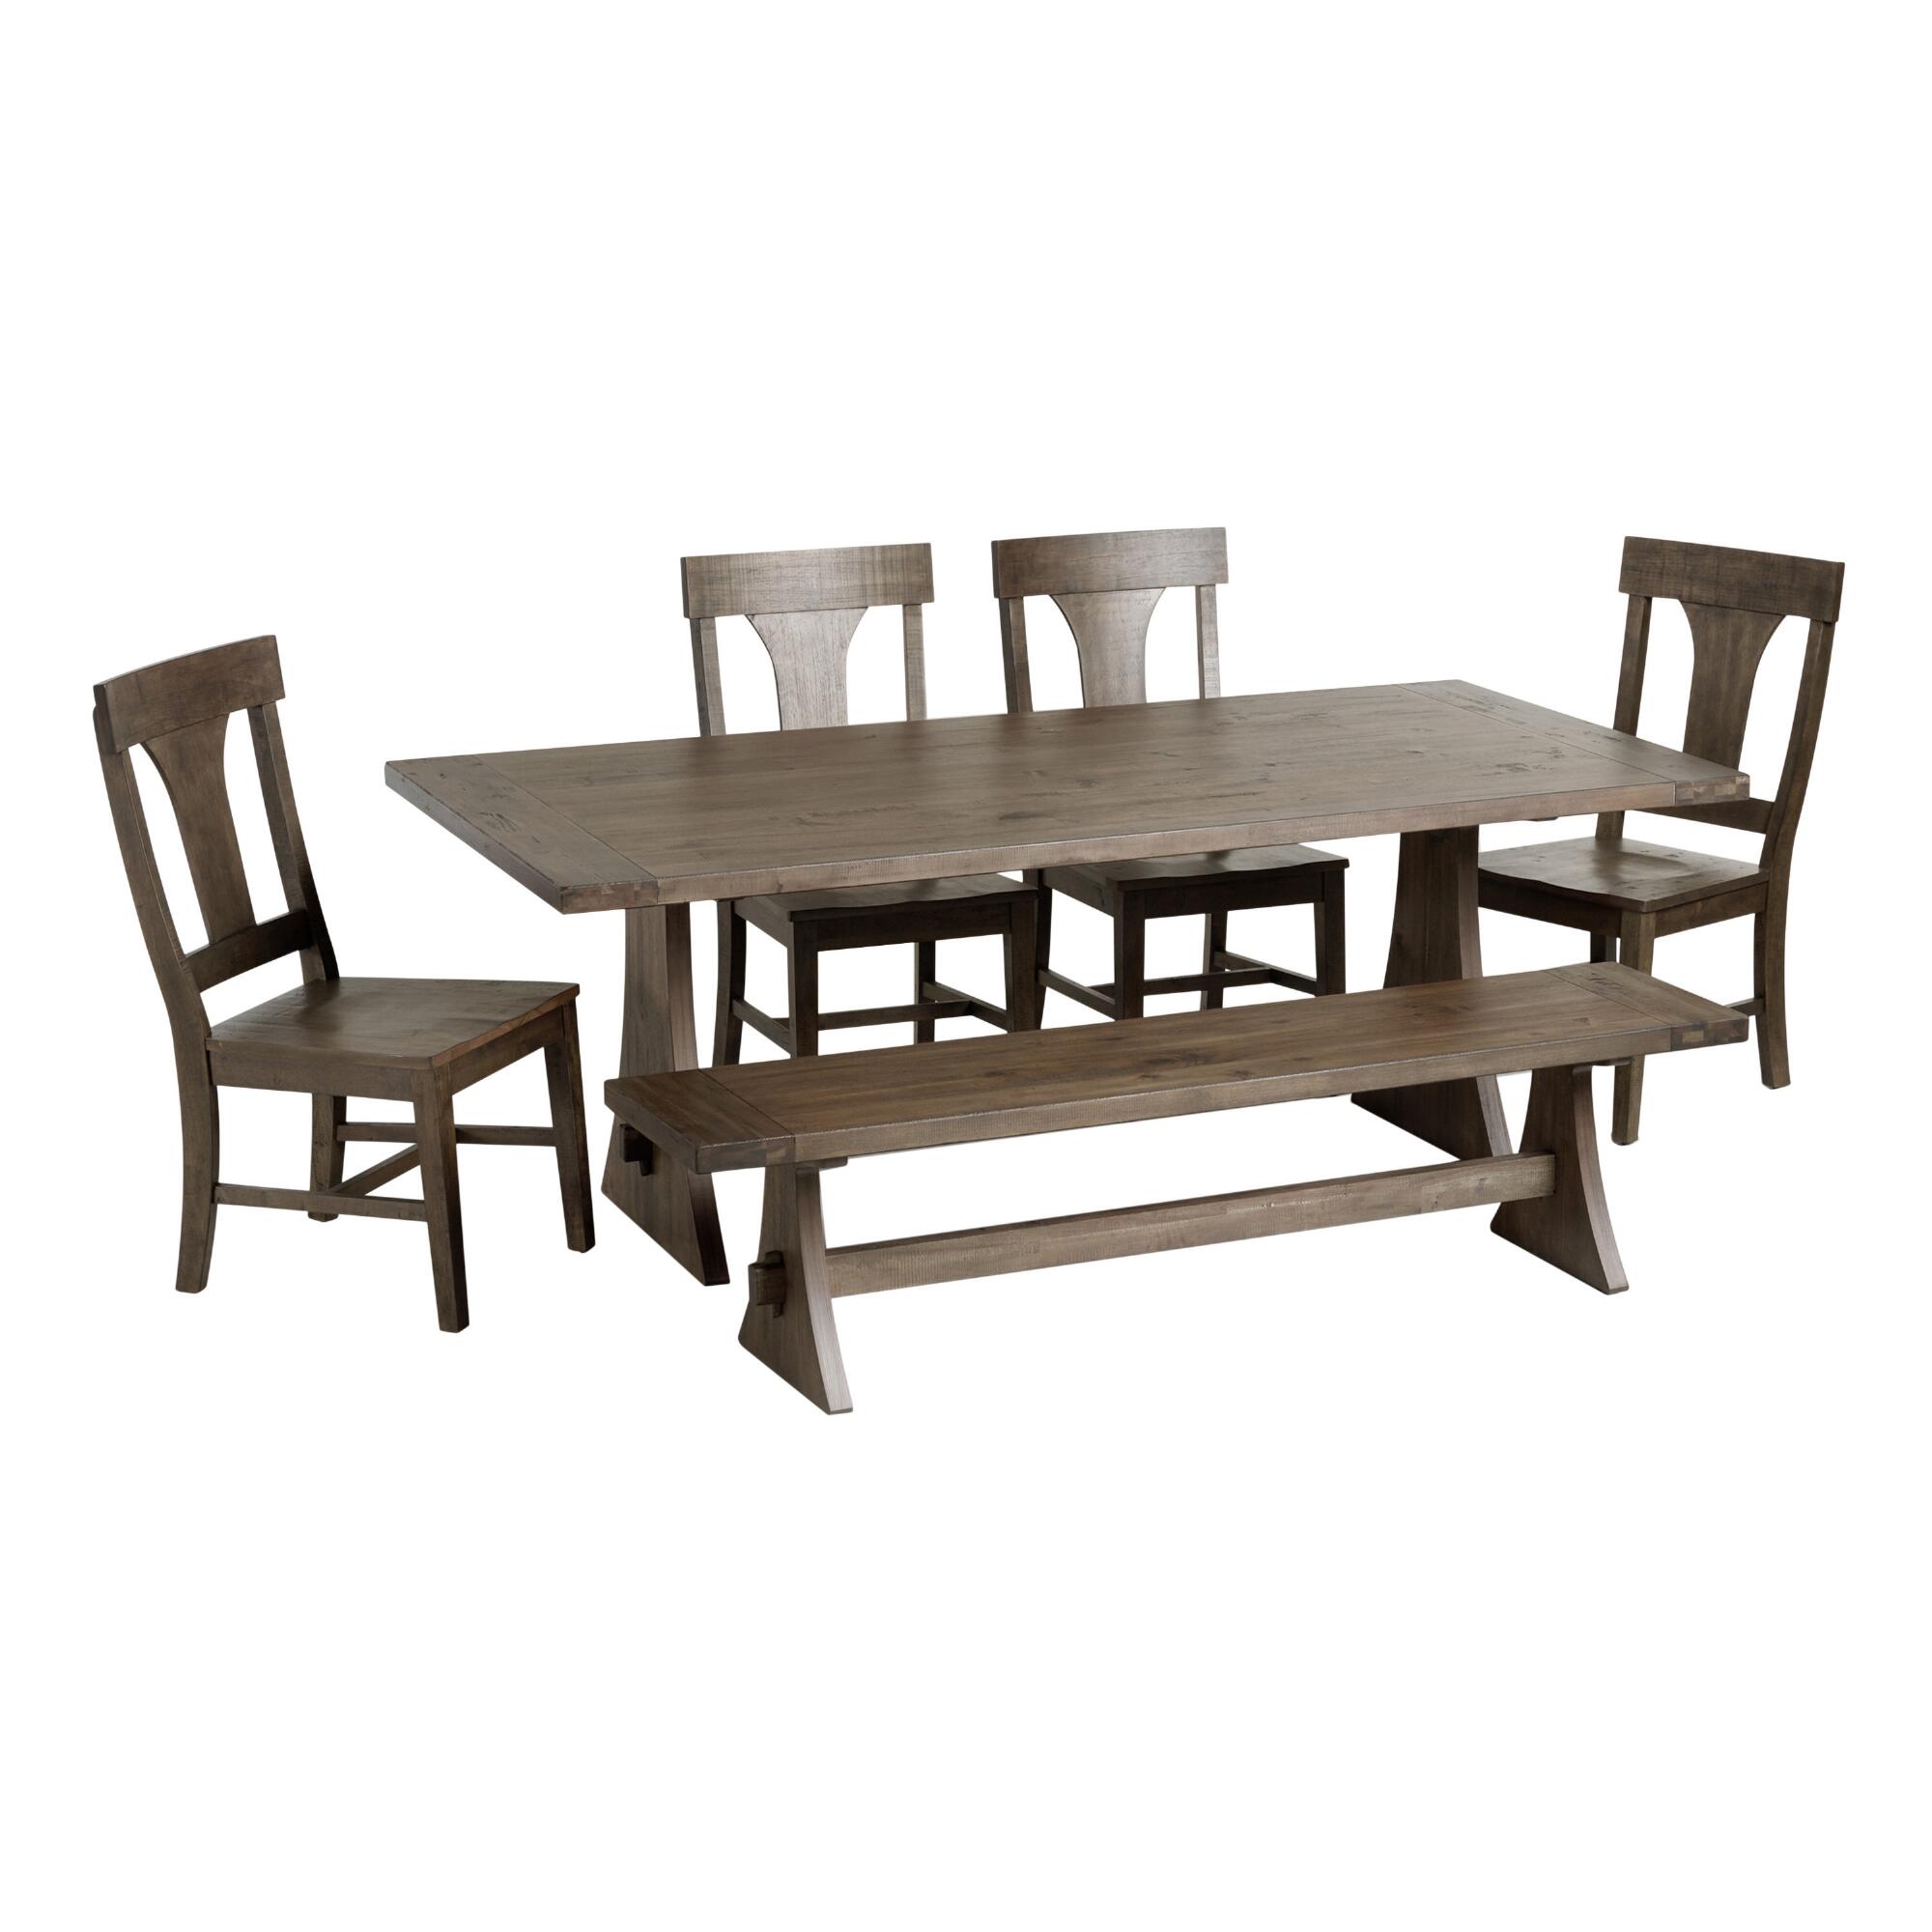 Rustic Wood Brinley Dining Collection by World Market